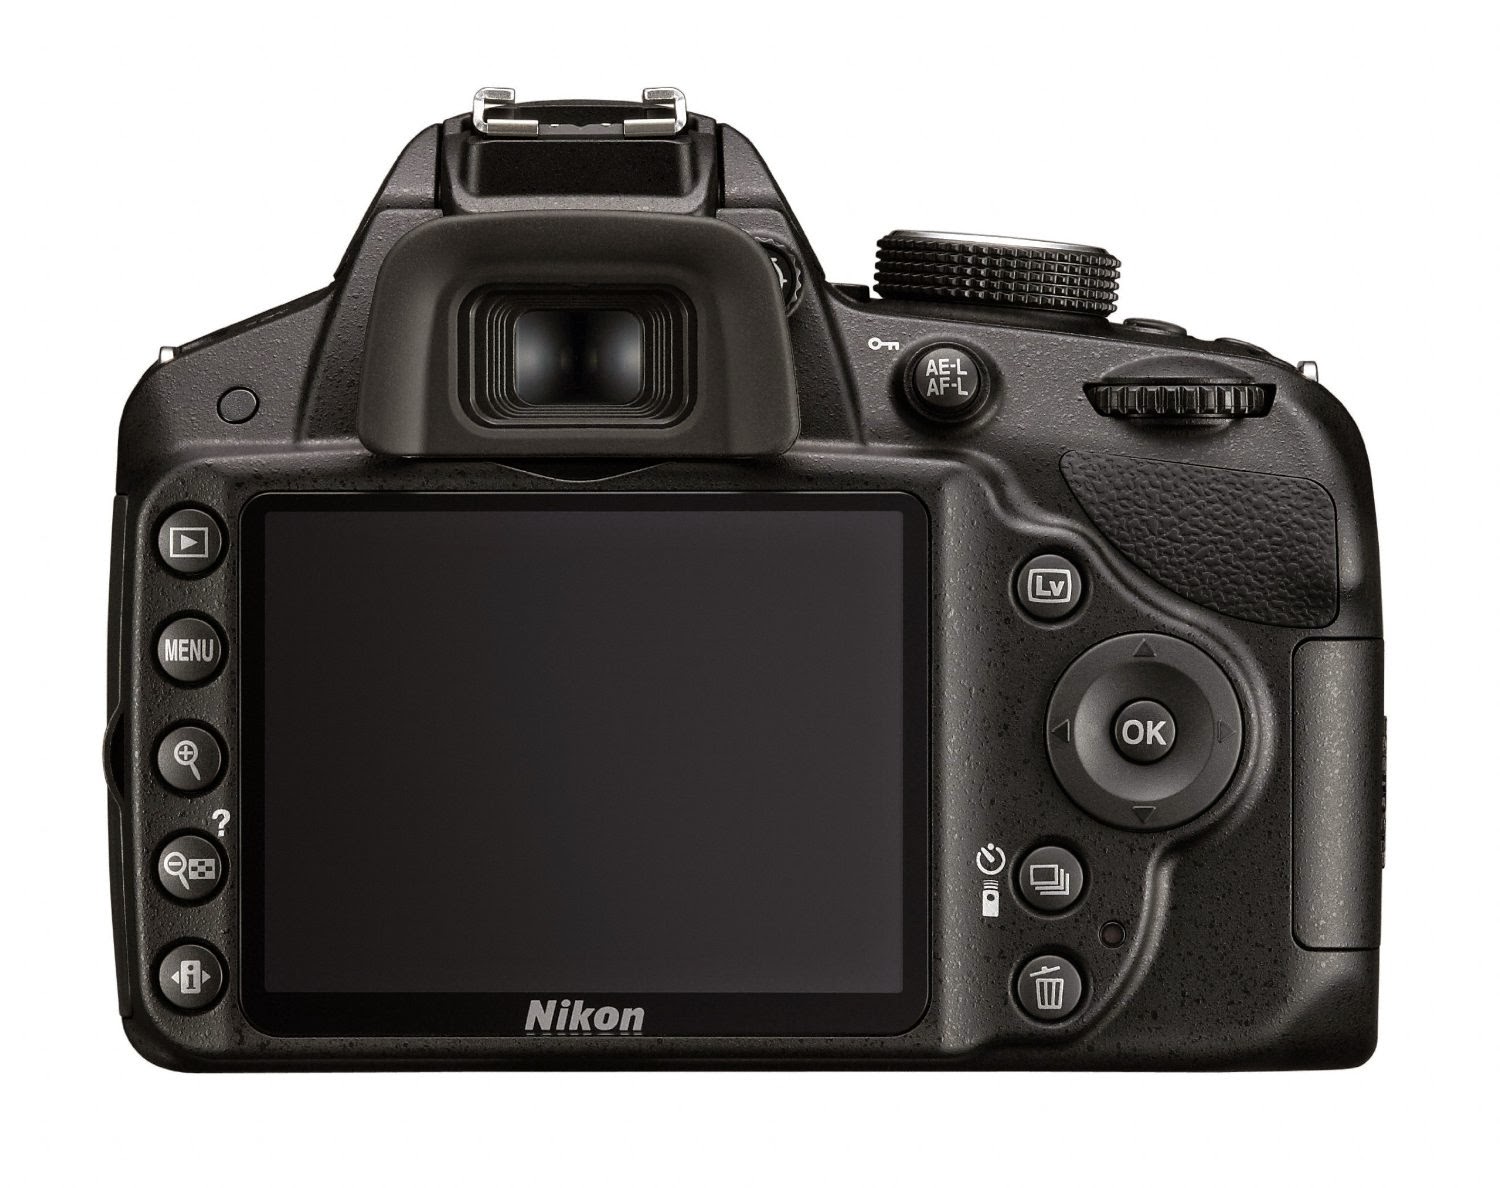 Nikon D3200 DSLR, rear view with 3" LCD screen, viewfinder, function buttons